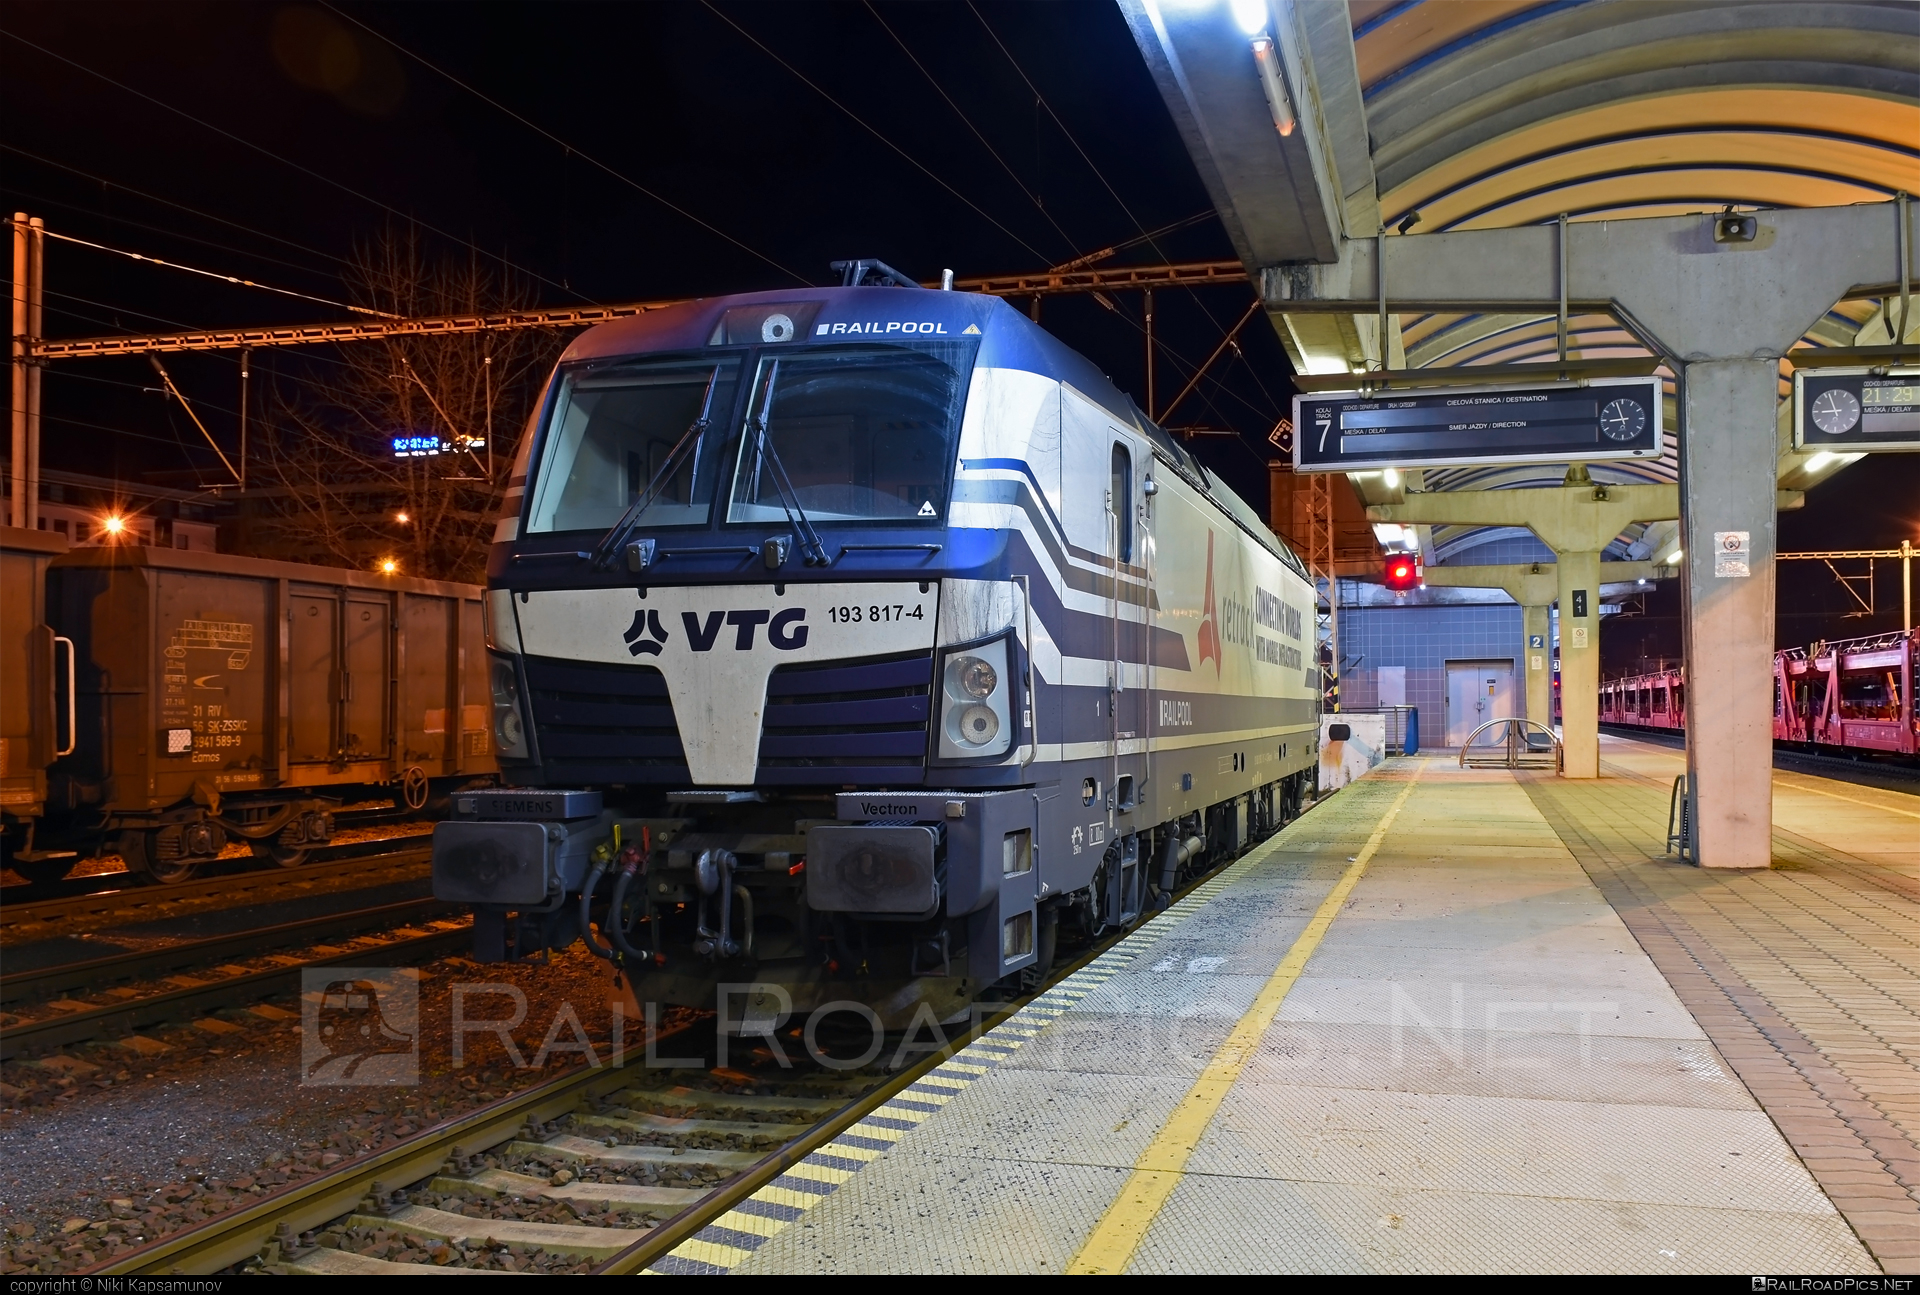 Siemens Vectron AC - 193 817-4 operated by Retrack GmbH & Co. KG #railpool #railpoolgmbh #retrack #retrackgmbh #siemens #siemensvectron #siemensvectronac #vectron #vectronac #vtg